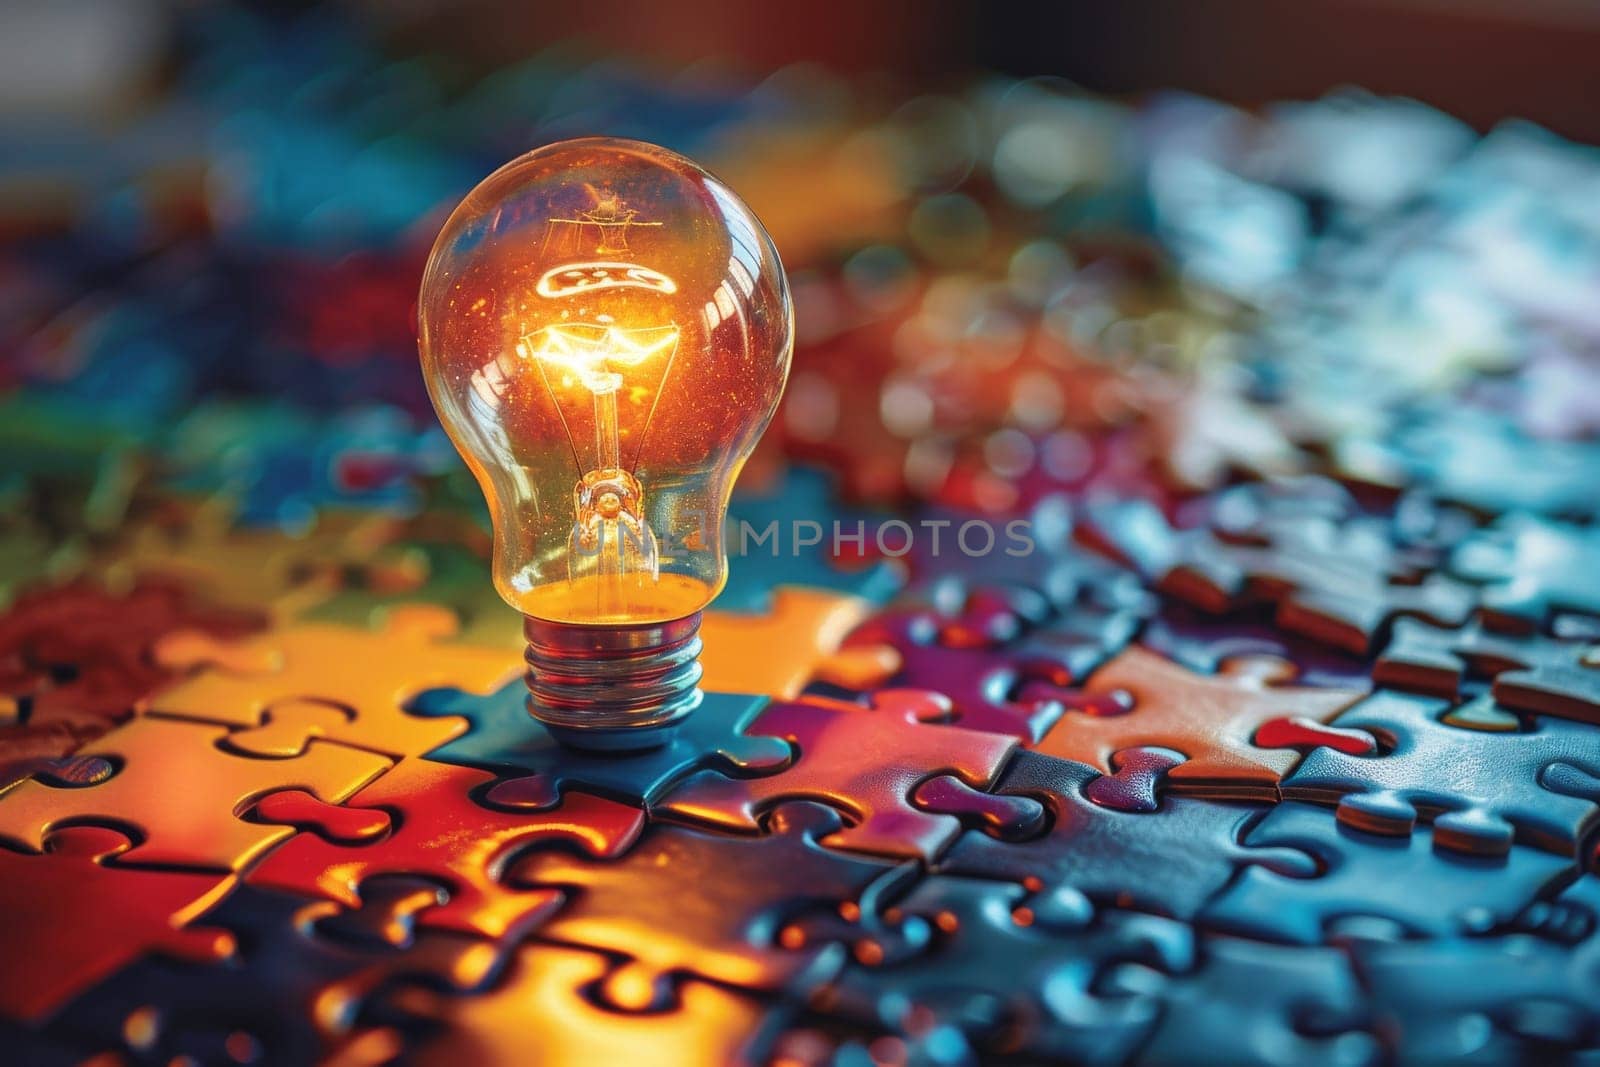 A light bulb is lit up on a puzzle piece. The puzzle piece is colorful and has a unique design. The light bulb adds a sense of warmth and brightness to the scene, making it feel cozy and inviting